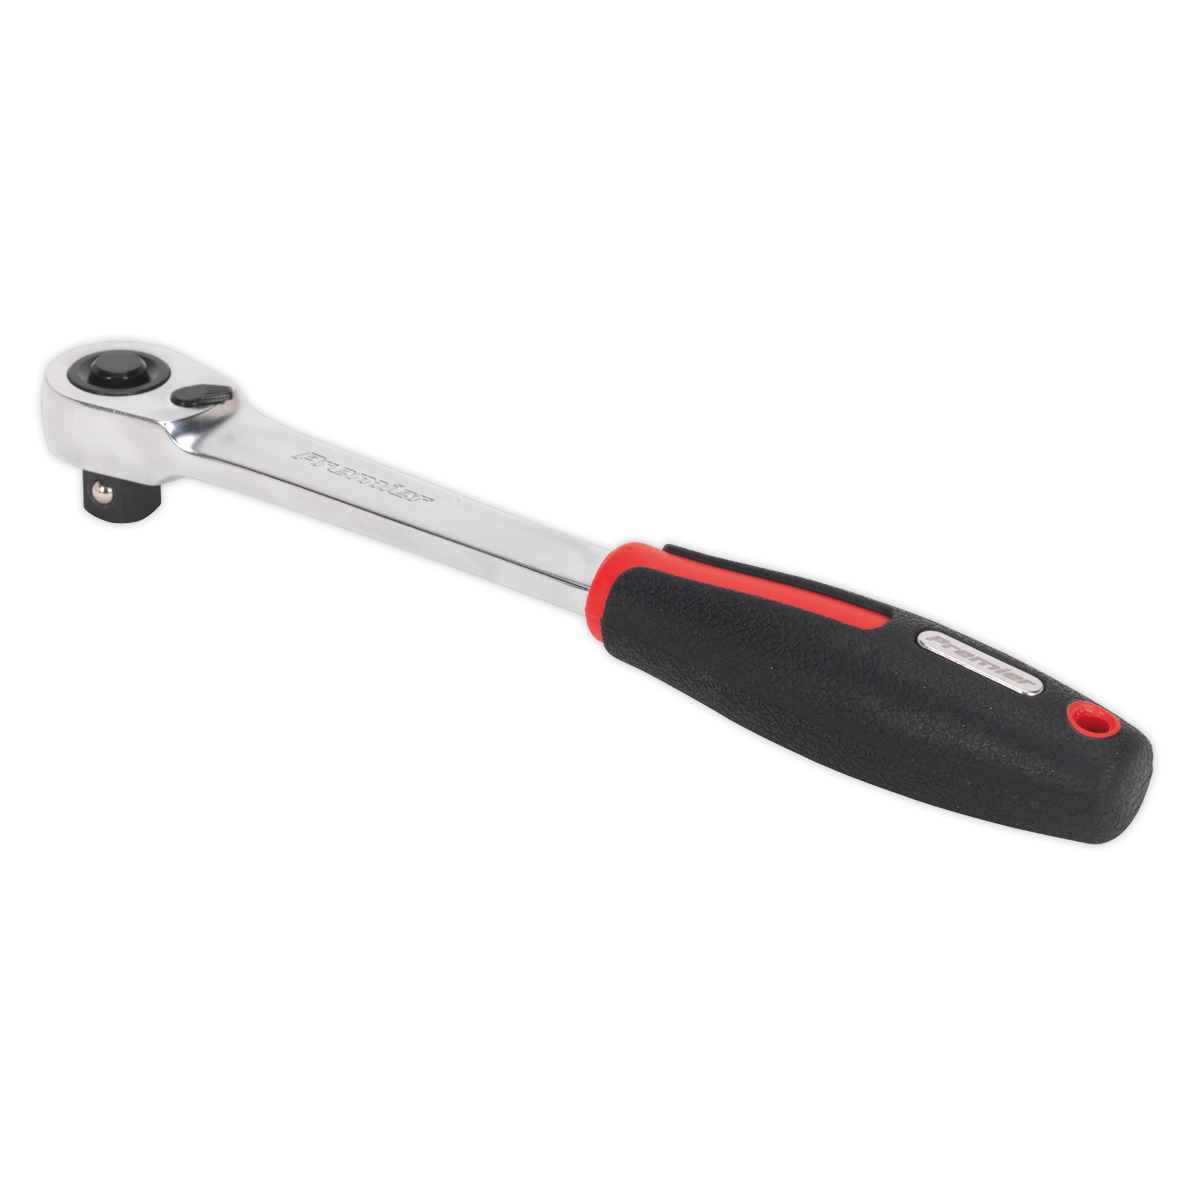 Sealey 1/2"Sq Drive 72-Tooth Ratchet Wrench Flip Reverse - Platinum Series AK8982